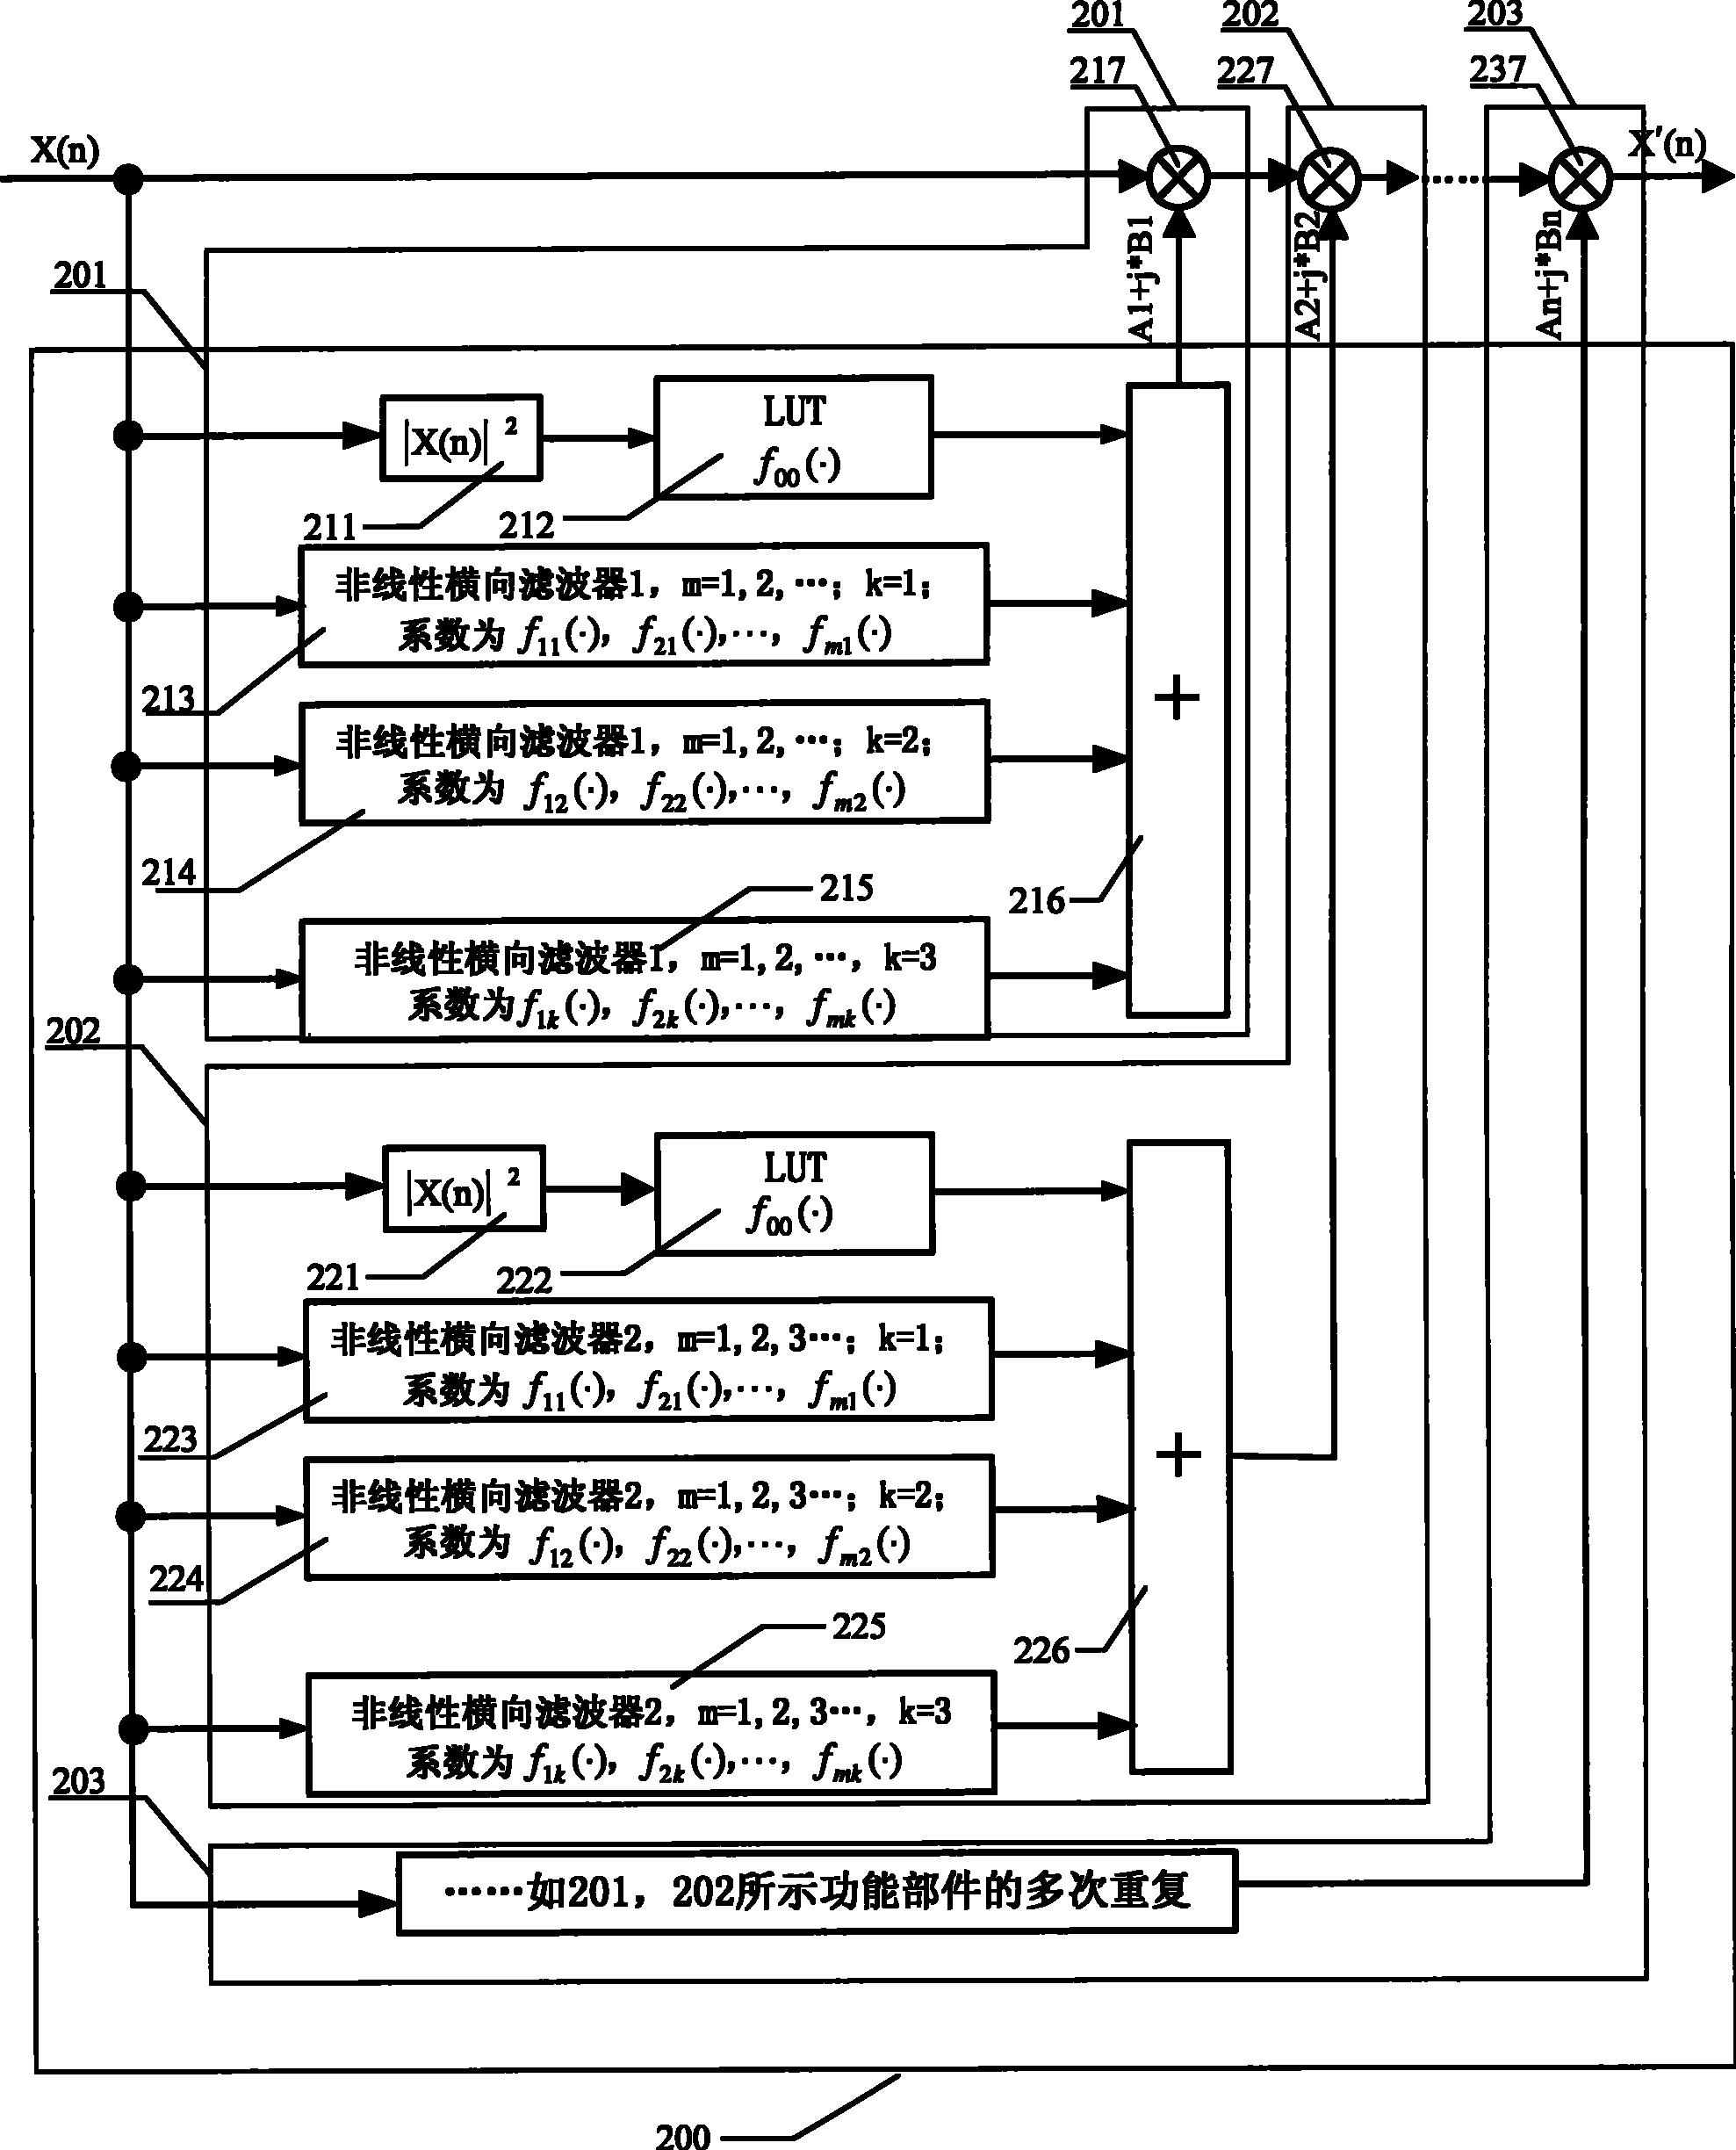 Predistortion model apparatus as well as apparatus, system and method for processing predistortion of signal